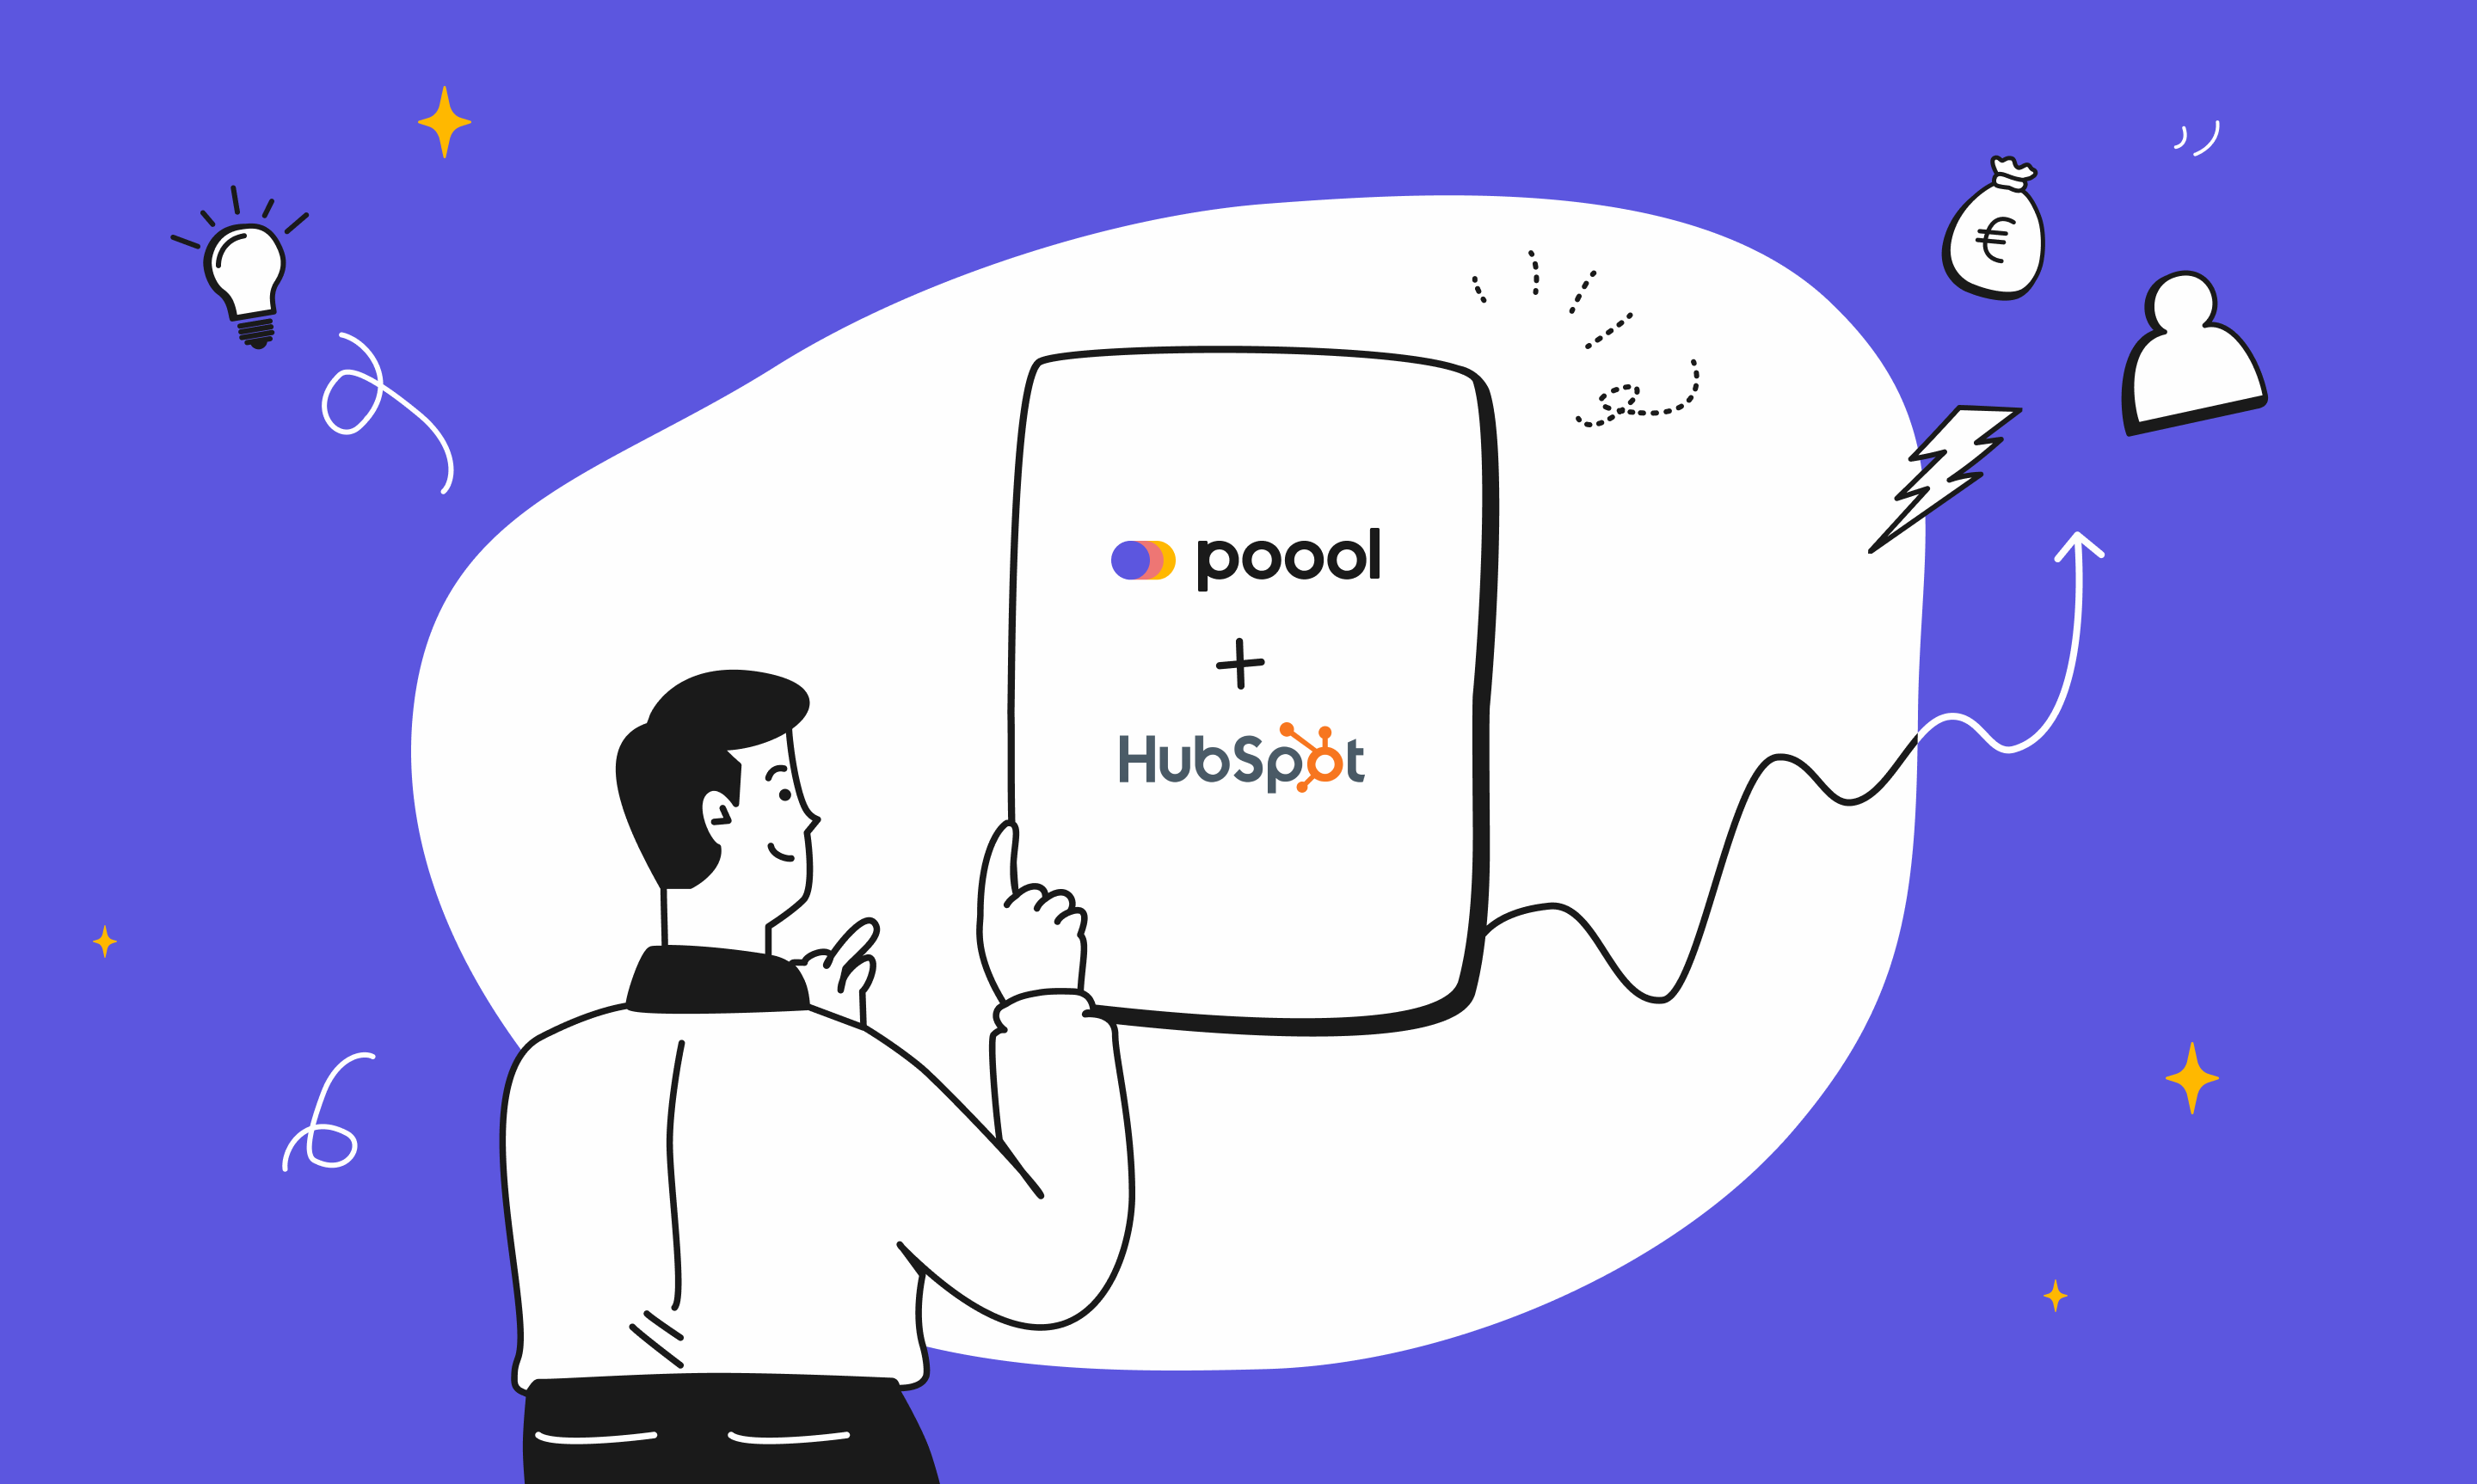 How to use Poool and Hubspot to increase lead generation by 200%